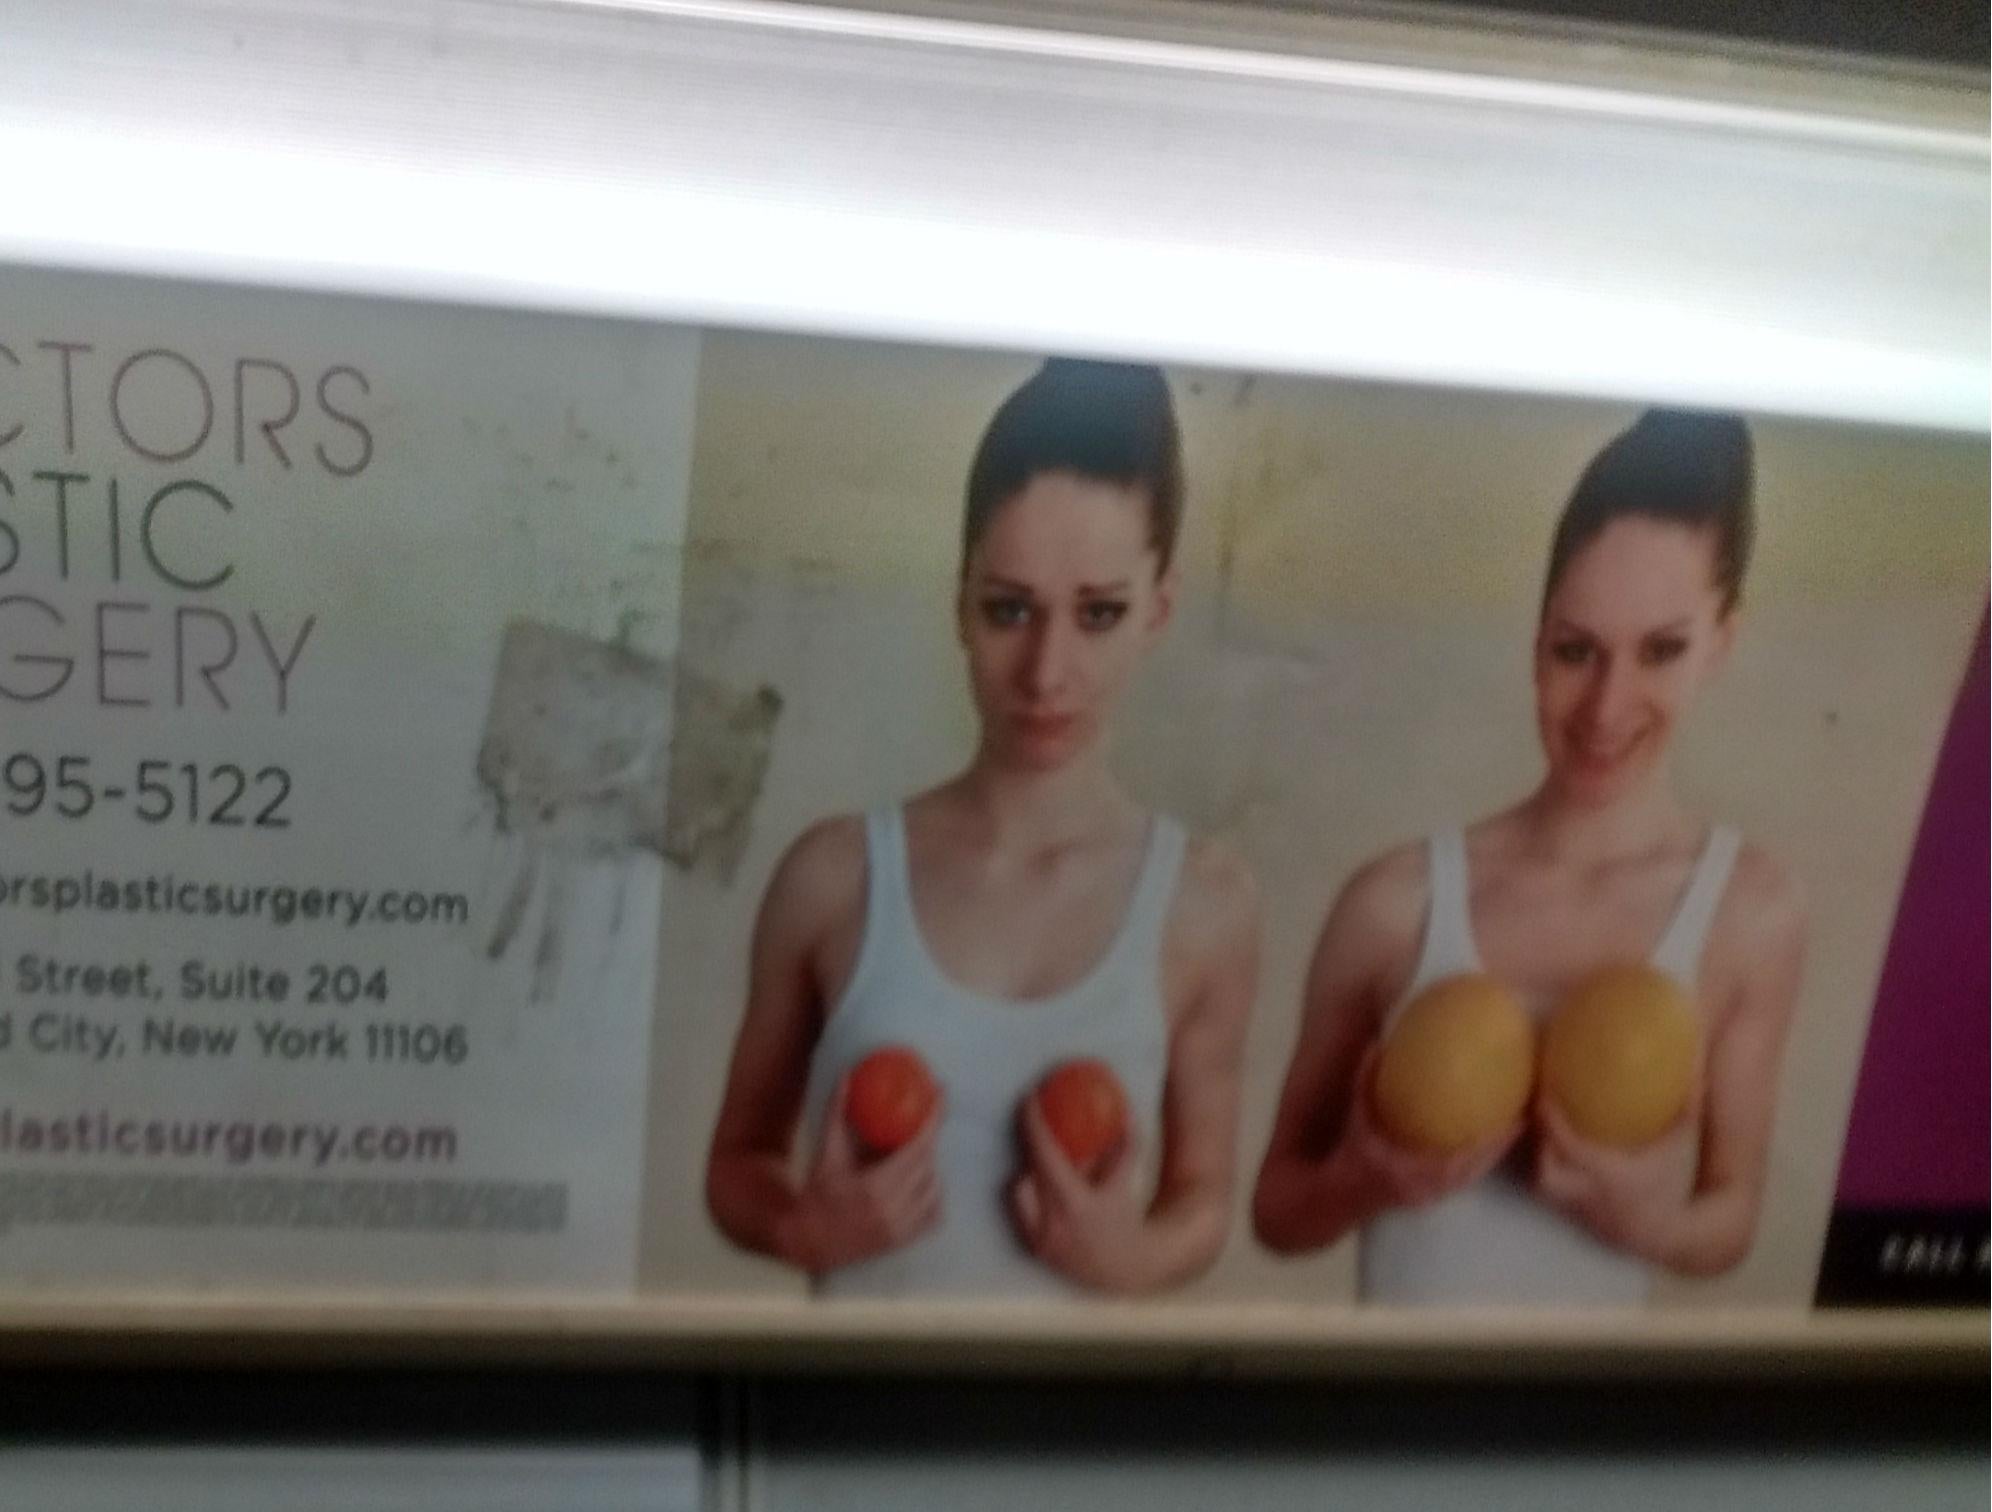 Just one of the many adverts female commuters are subjected to on the New York subway